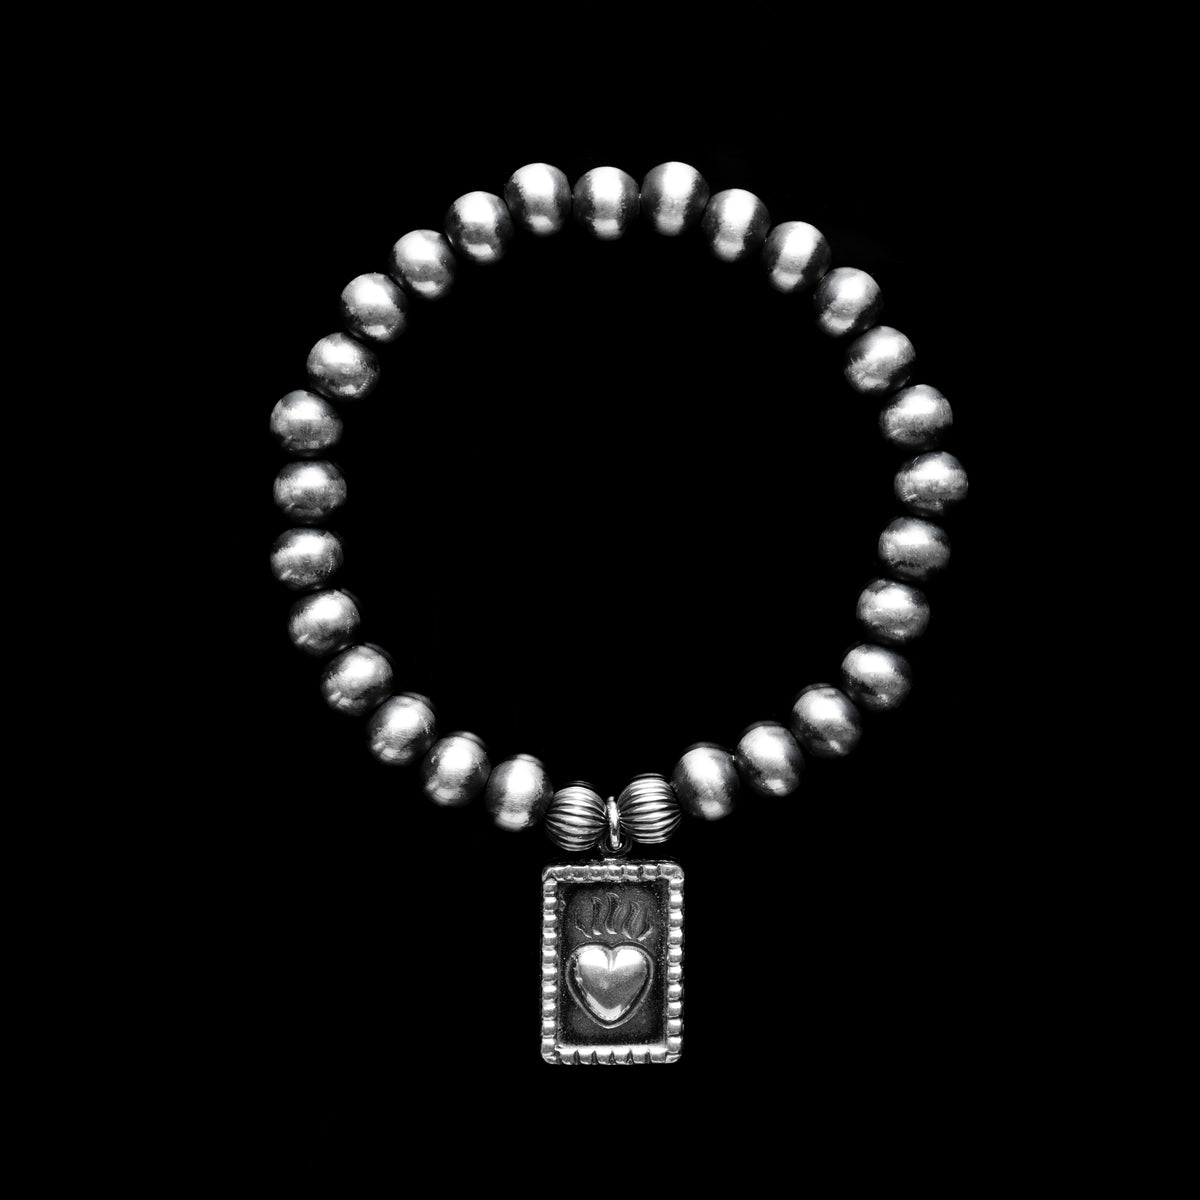 7mm Santa Fe Pearl Stretch Bracelet with Sterling Silver Sacred Heart Charm